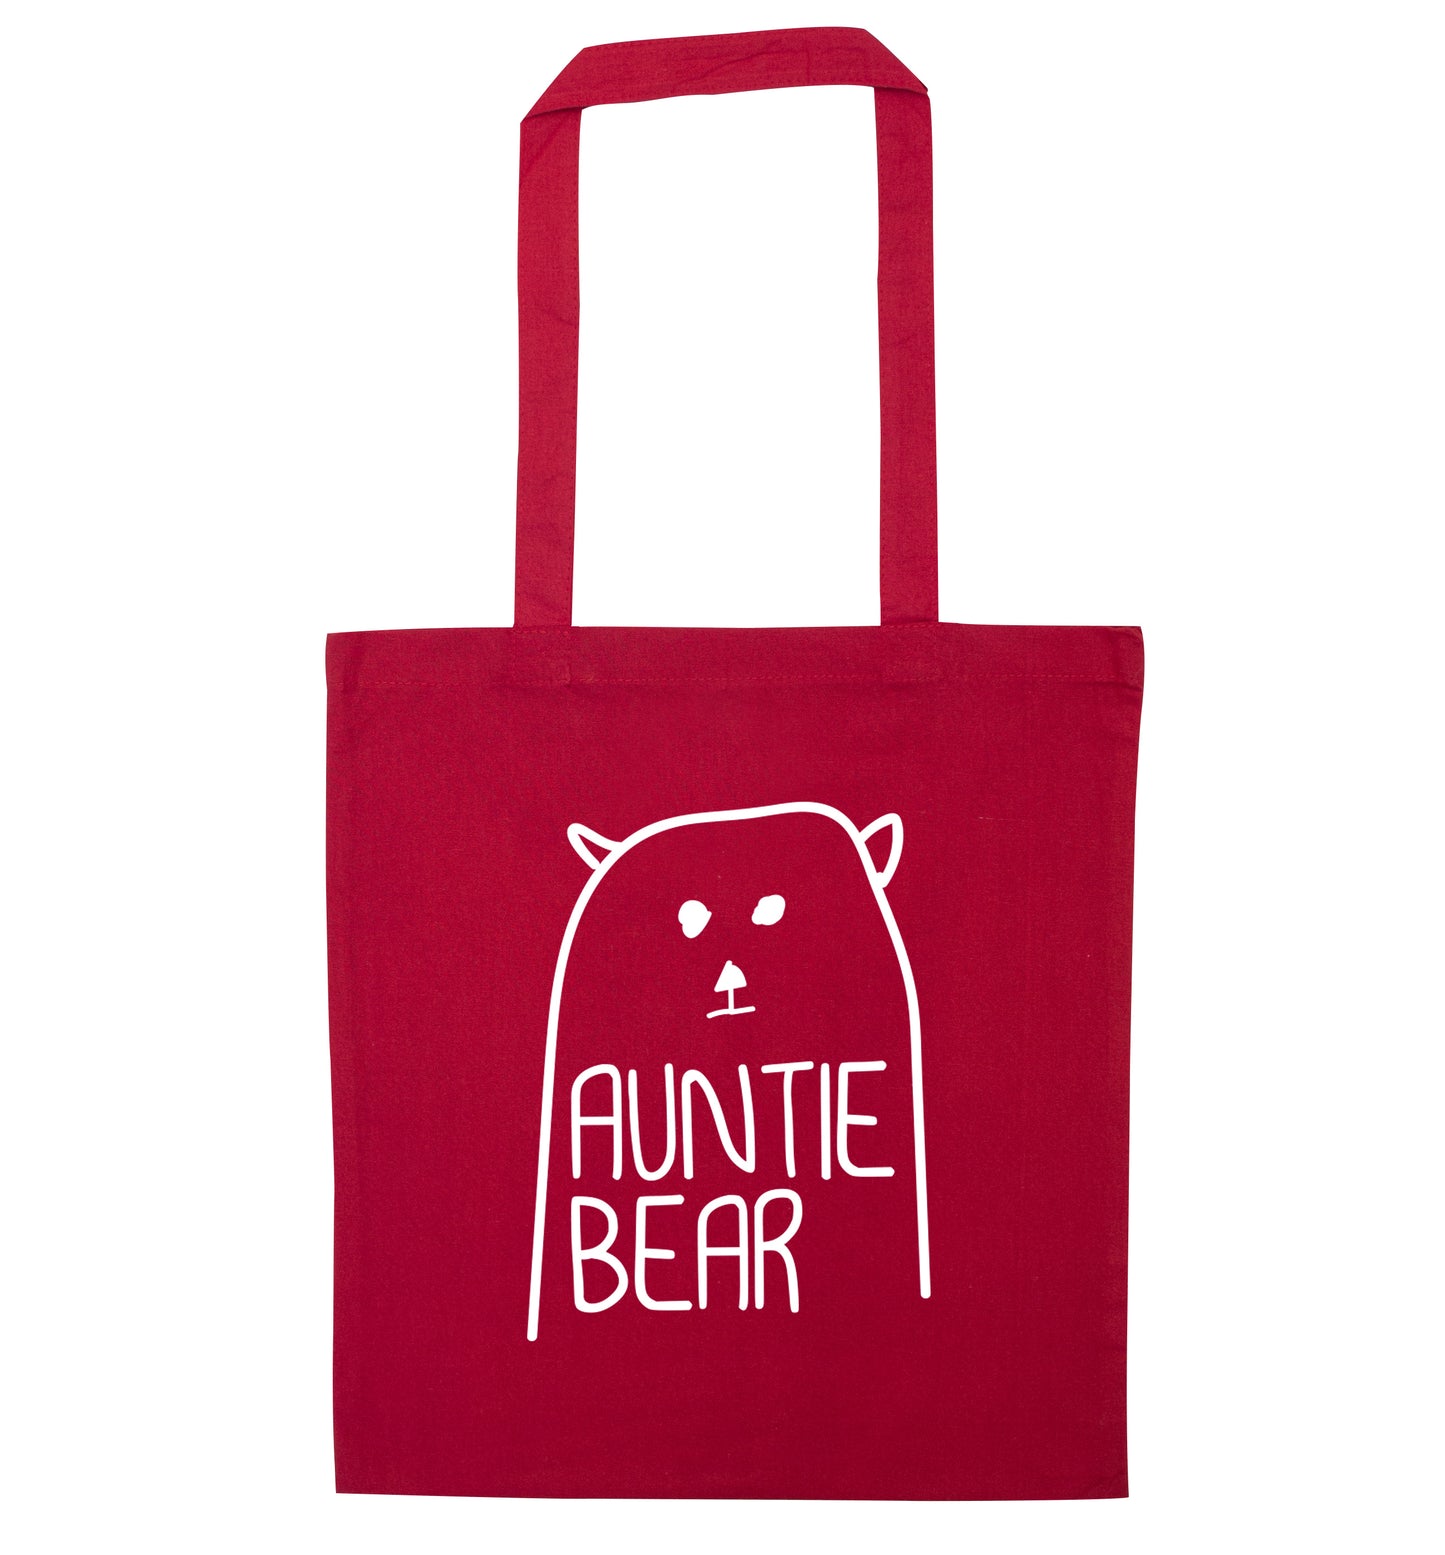 Auntie bear red tote bag